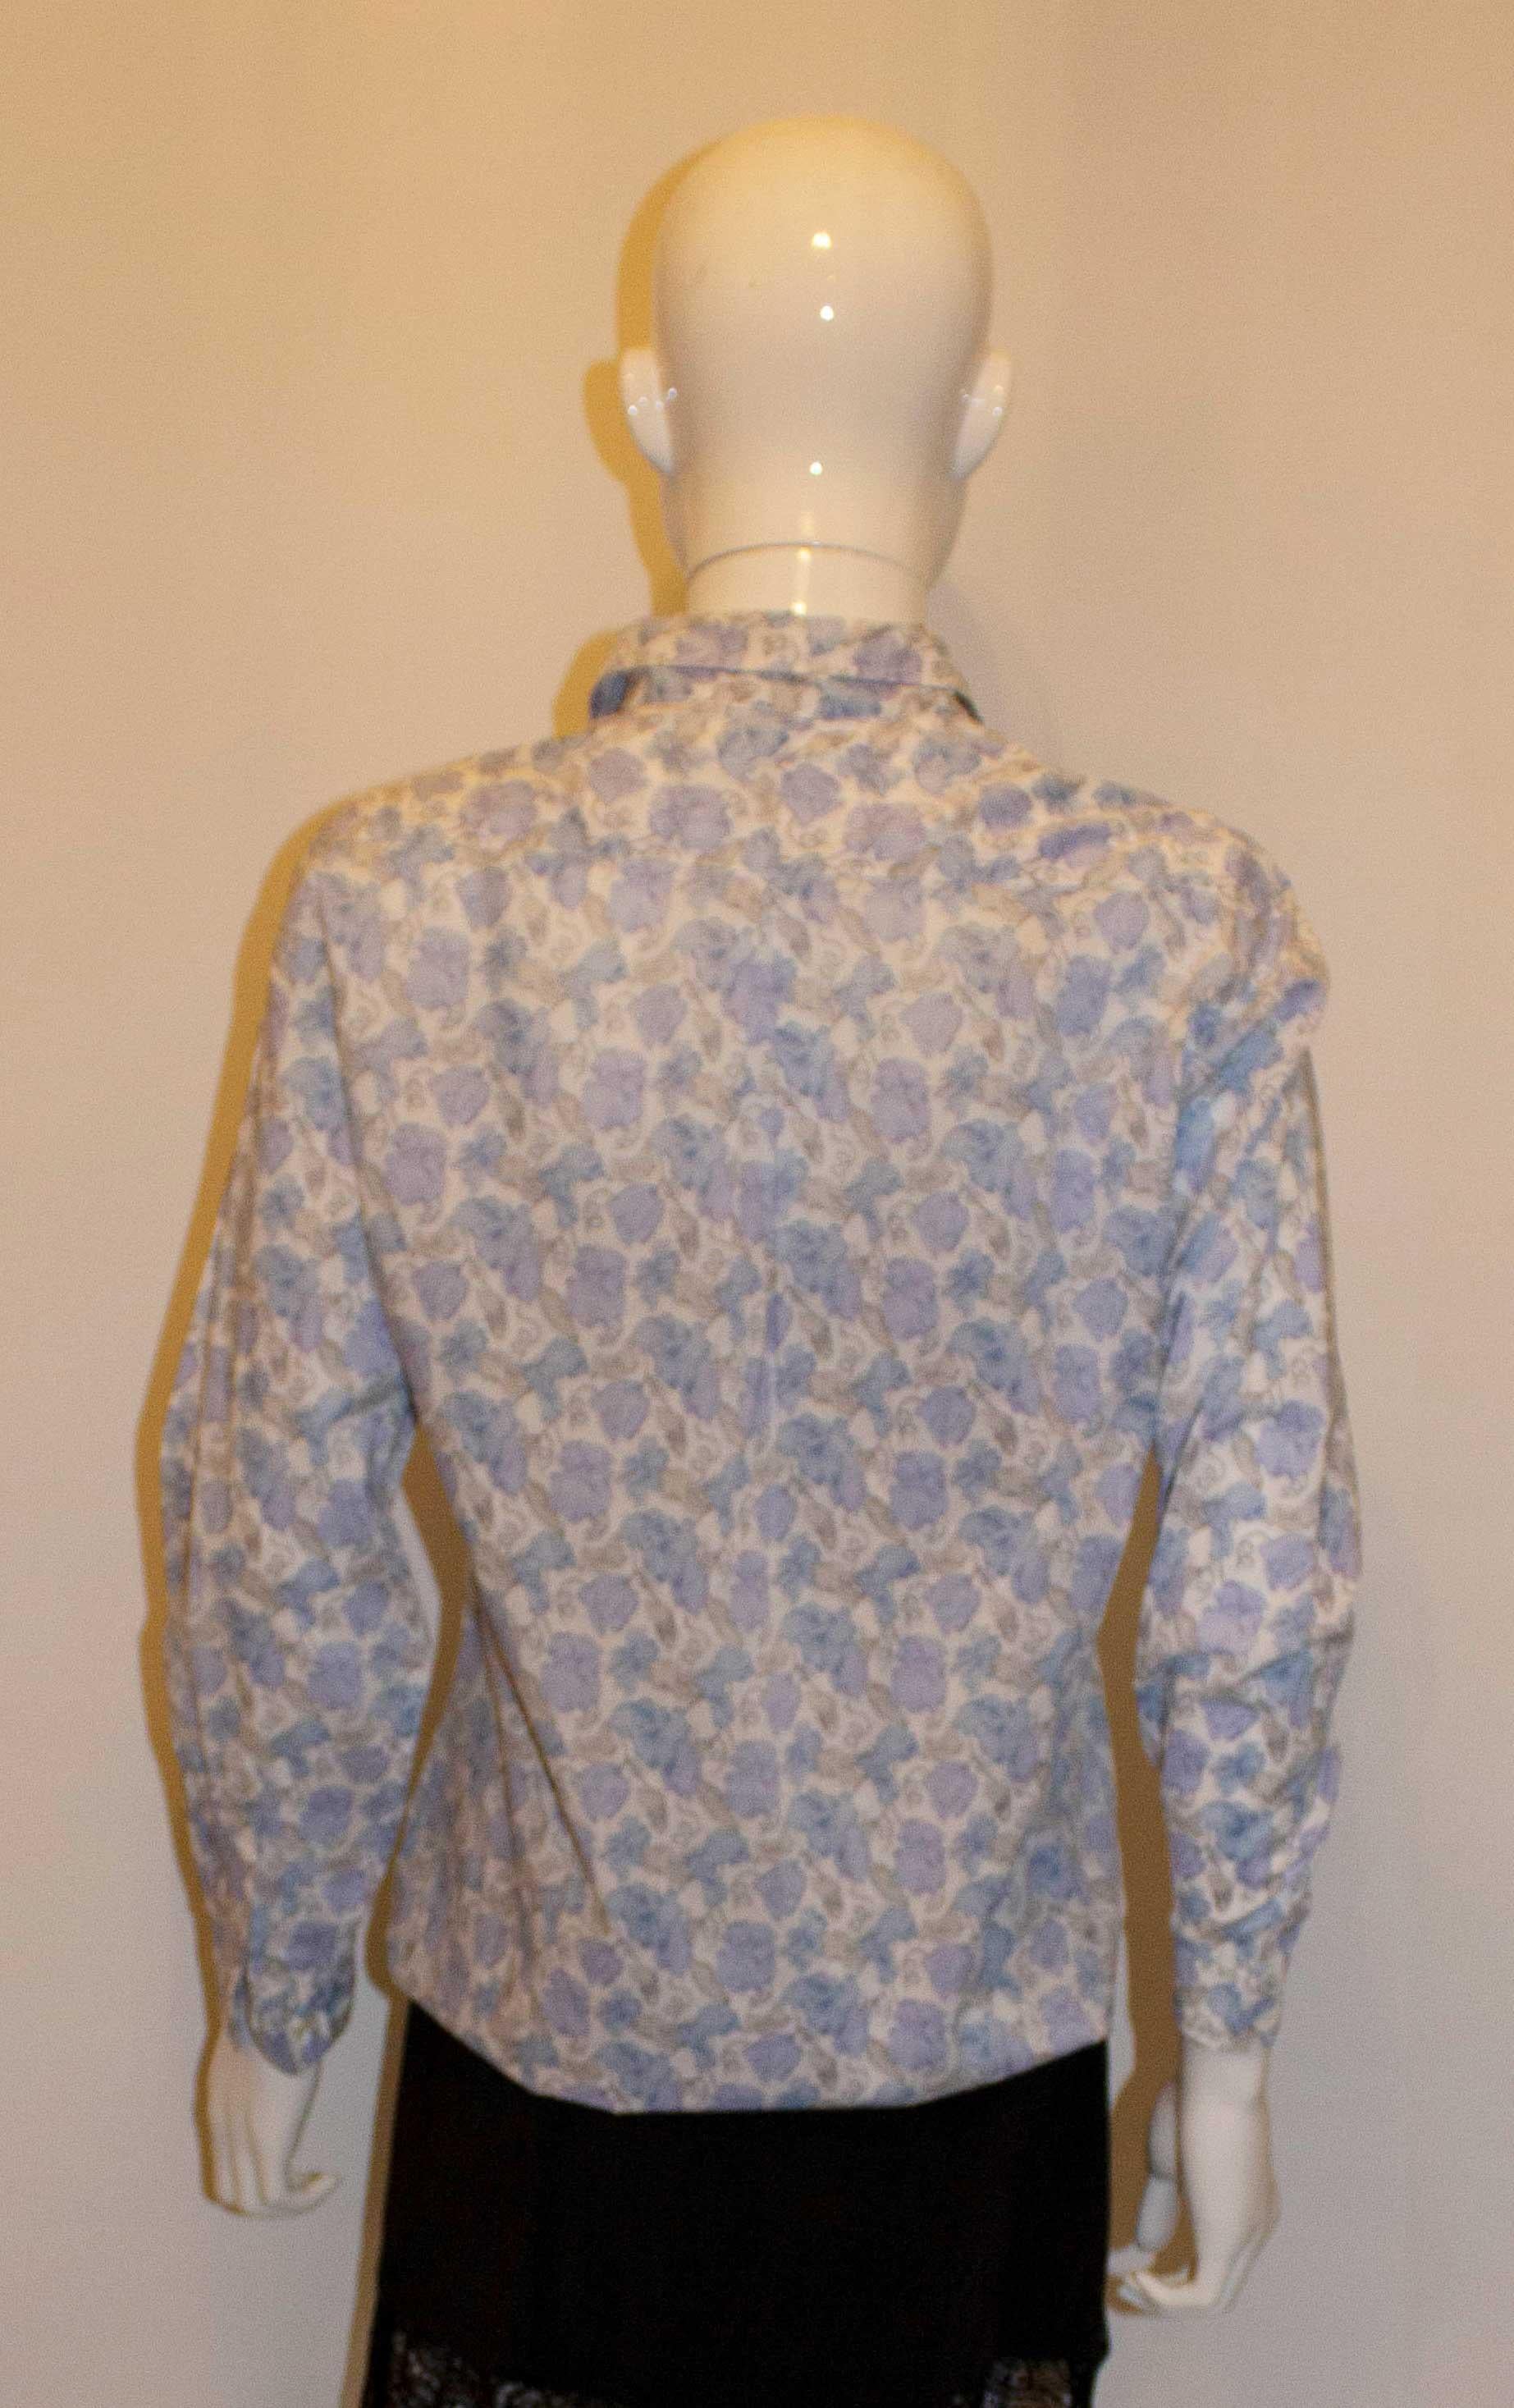 A very pretty vintage cotton shirt by Liberty / Cacharel.  The shirt is in a blue and white print, and has  a button front opening and pocket on the left hand side.  Made in Italy.
Measurements: Bust up to 38'', length 26''